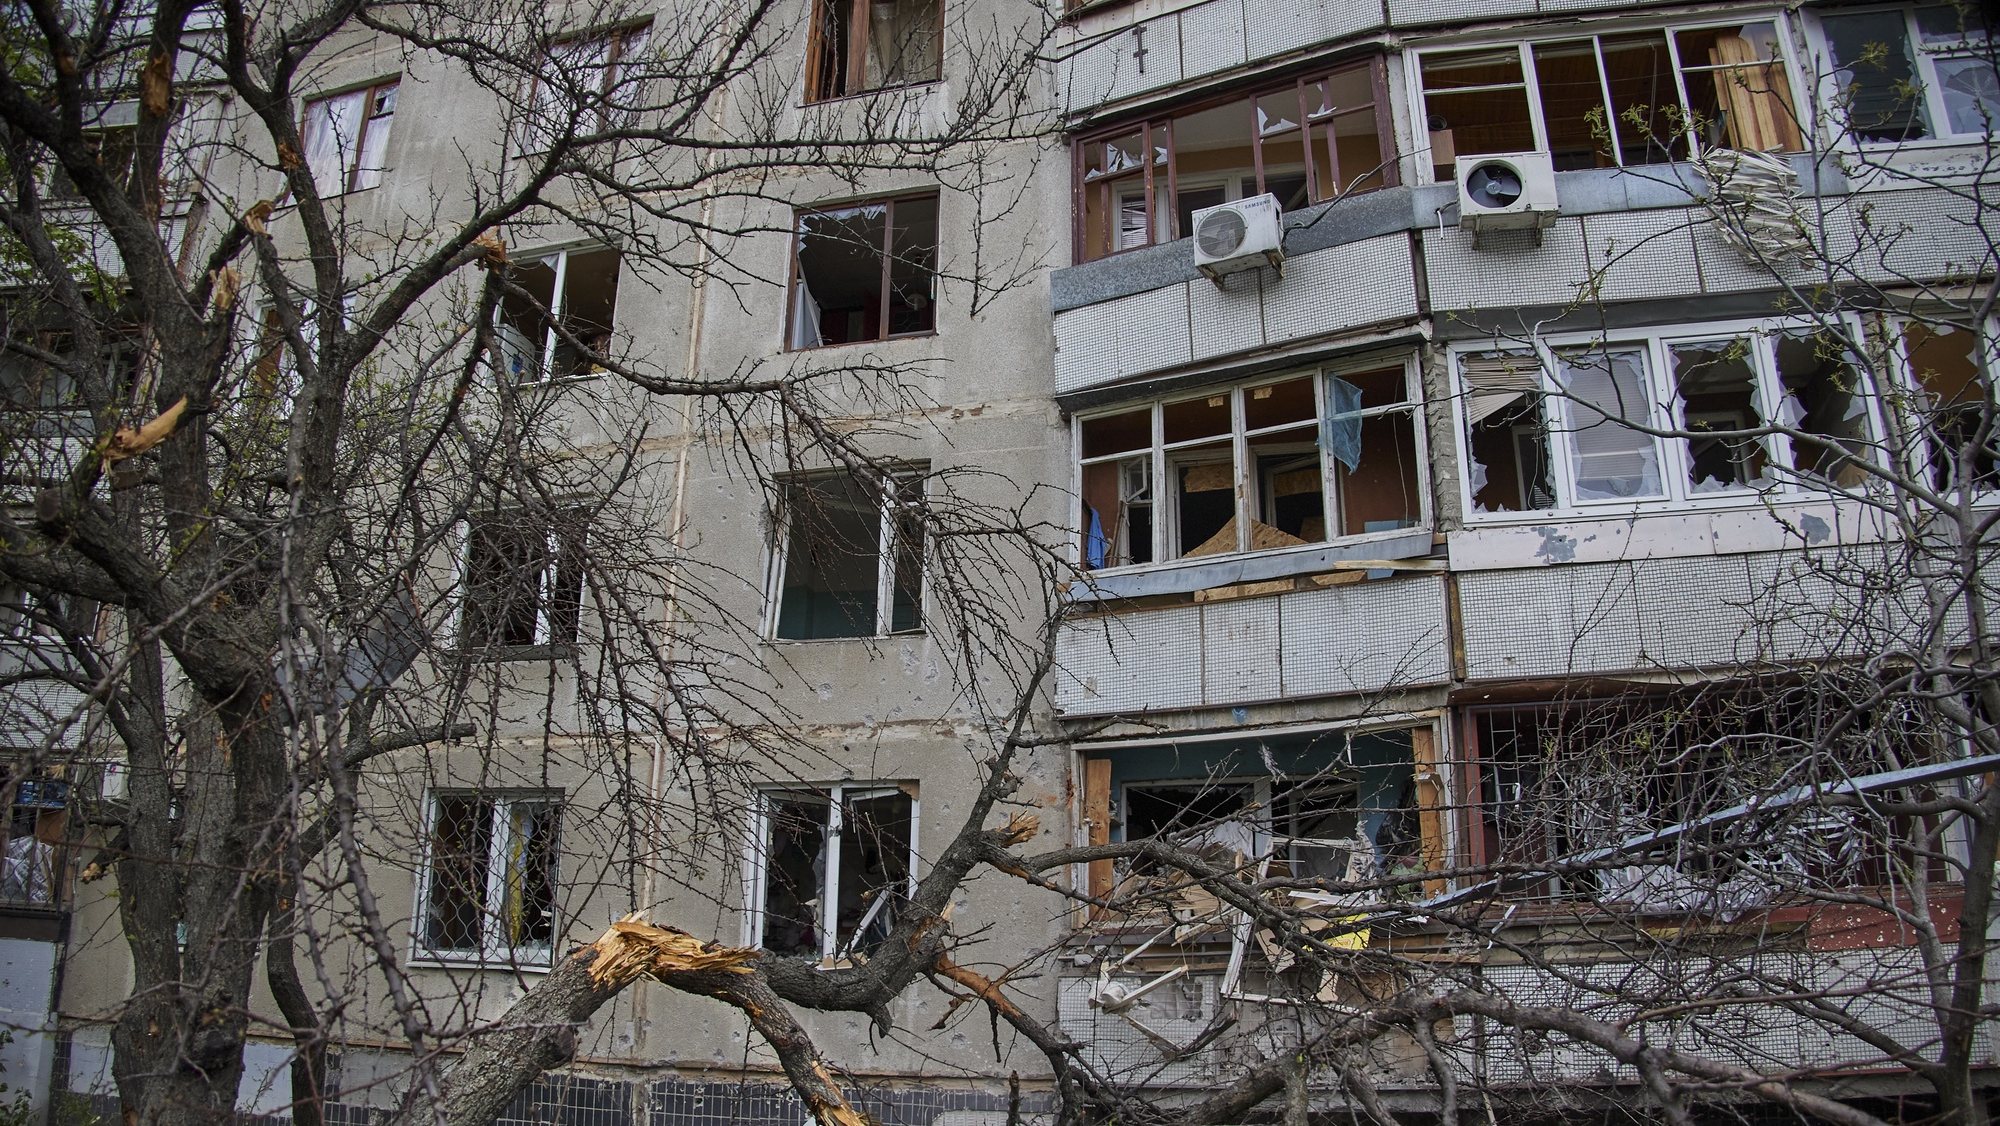 epa09912772 A residential building damage after recent shelling in the Eastern Ukrainian city of Kharkiv, 27 April 2022. The city of Kharkiv, Ukraine&#039;s second-largest, has witnessed repeated airstrikes from Russian forces including cities of satellites. Russian troops entered Ukraine on 24 February resulting in fighting and destruction in the country and triggering a series of severe economic sanctions on Russia by Western countries.  EPA/SERGEY KOZLOV